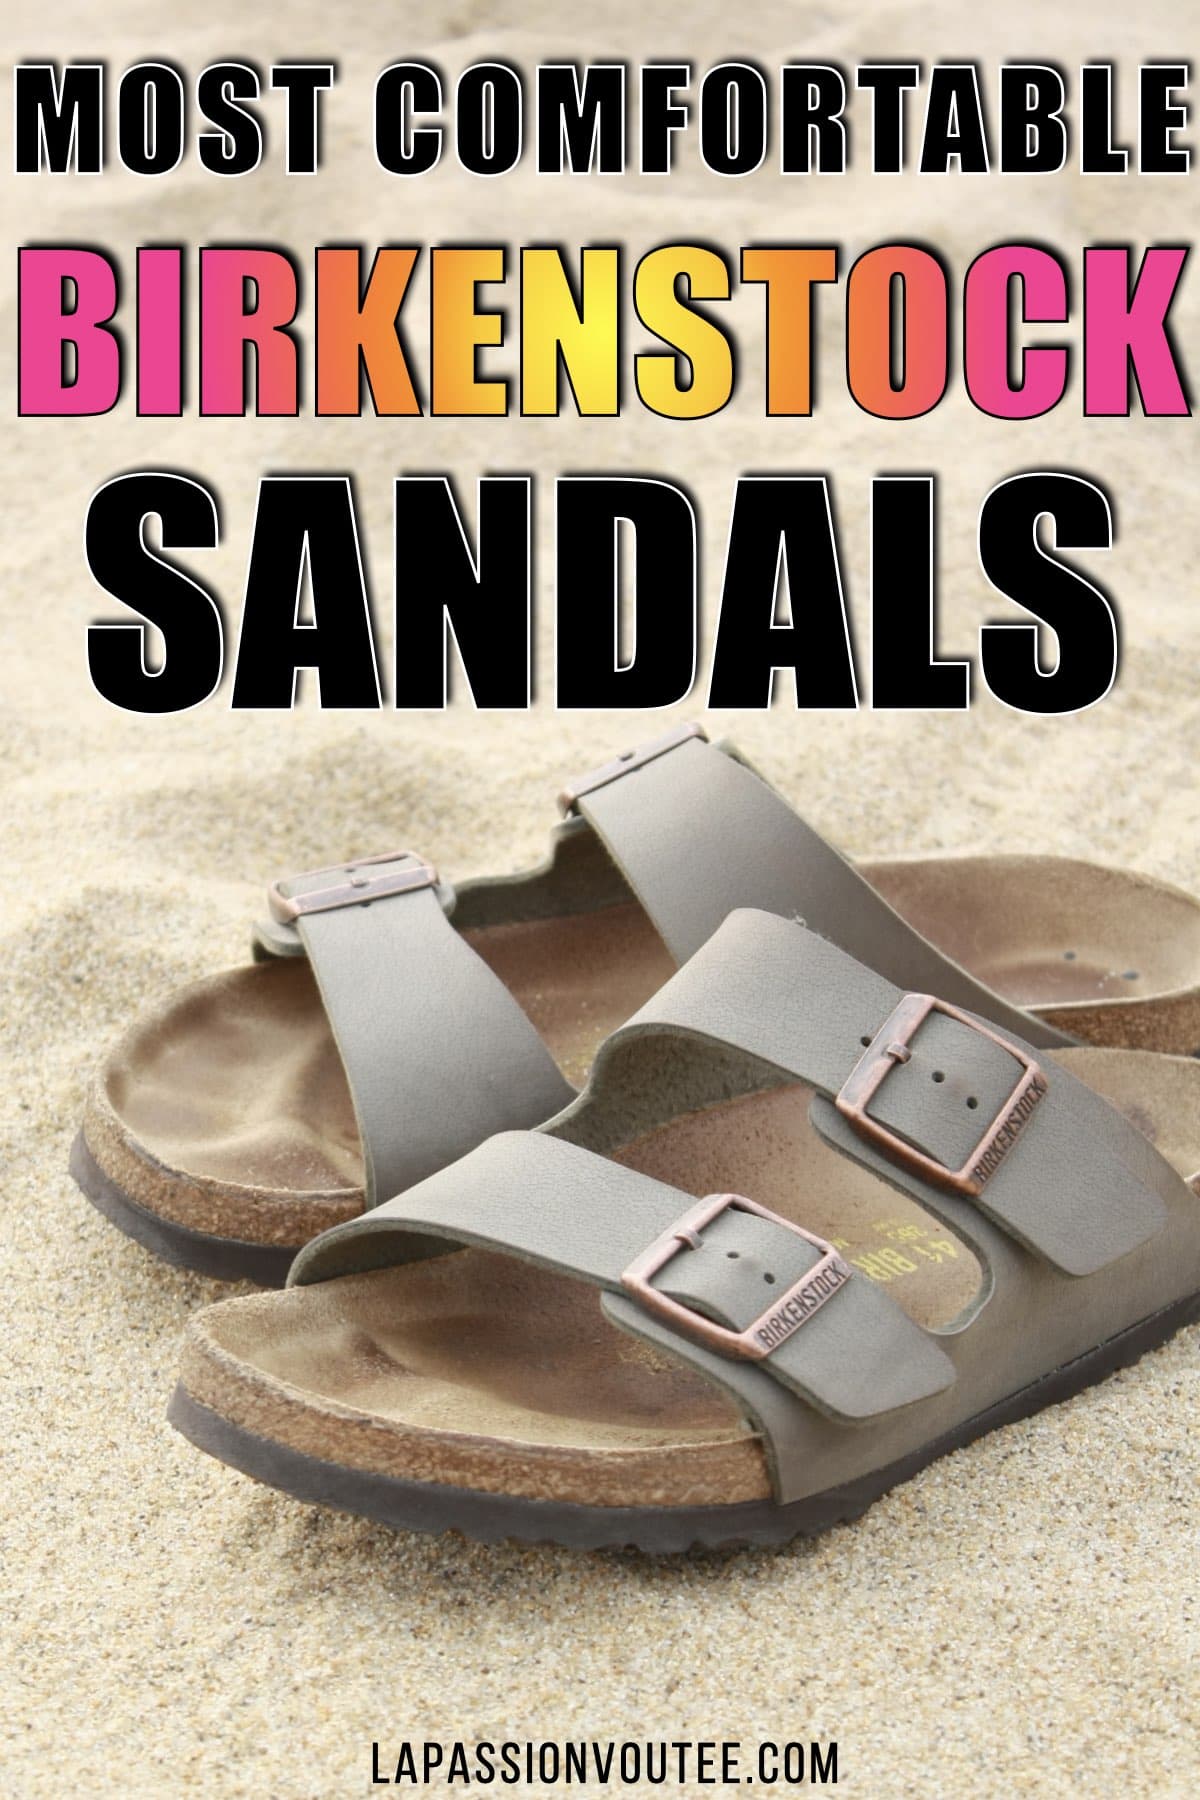 Are Birkenstocks worth it? Debunking the hype around the best Birkenstocks for women in this ultimate guide to the best Birkenstock sandals everyone is talking about.